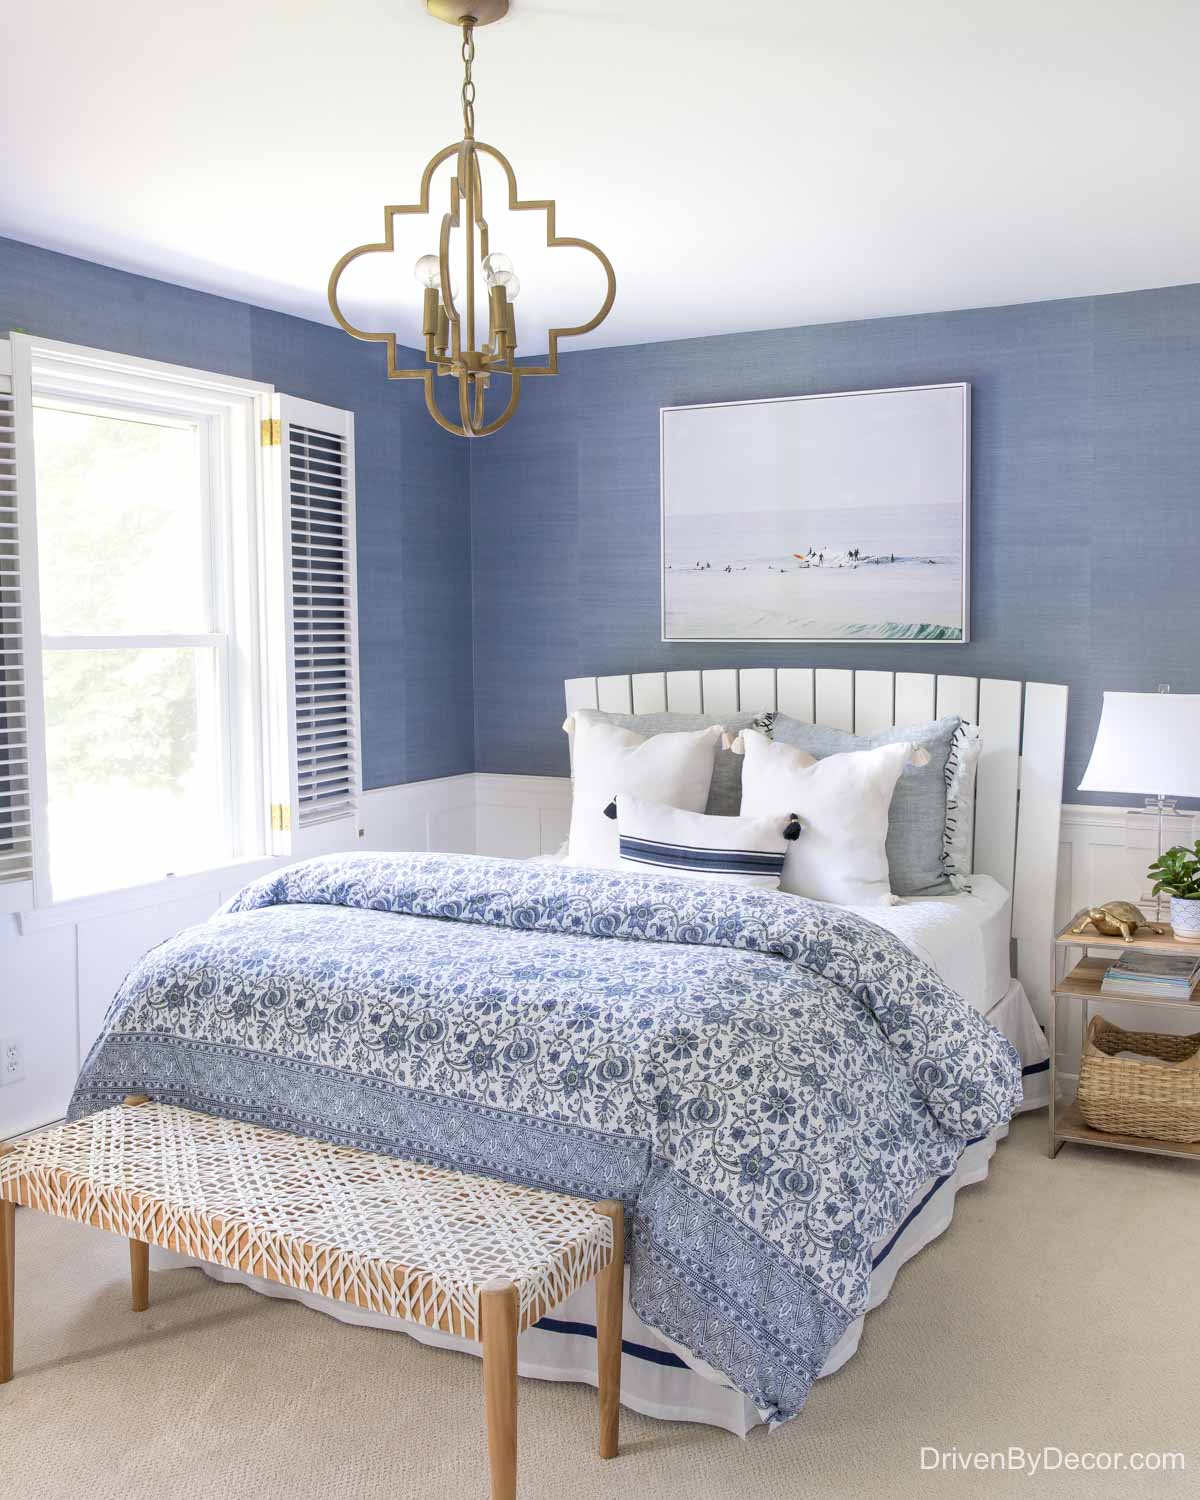 Love the end of bed bench in this blue and white bedroom!n